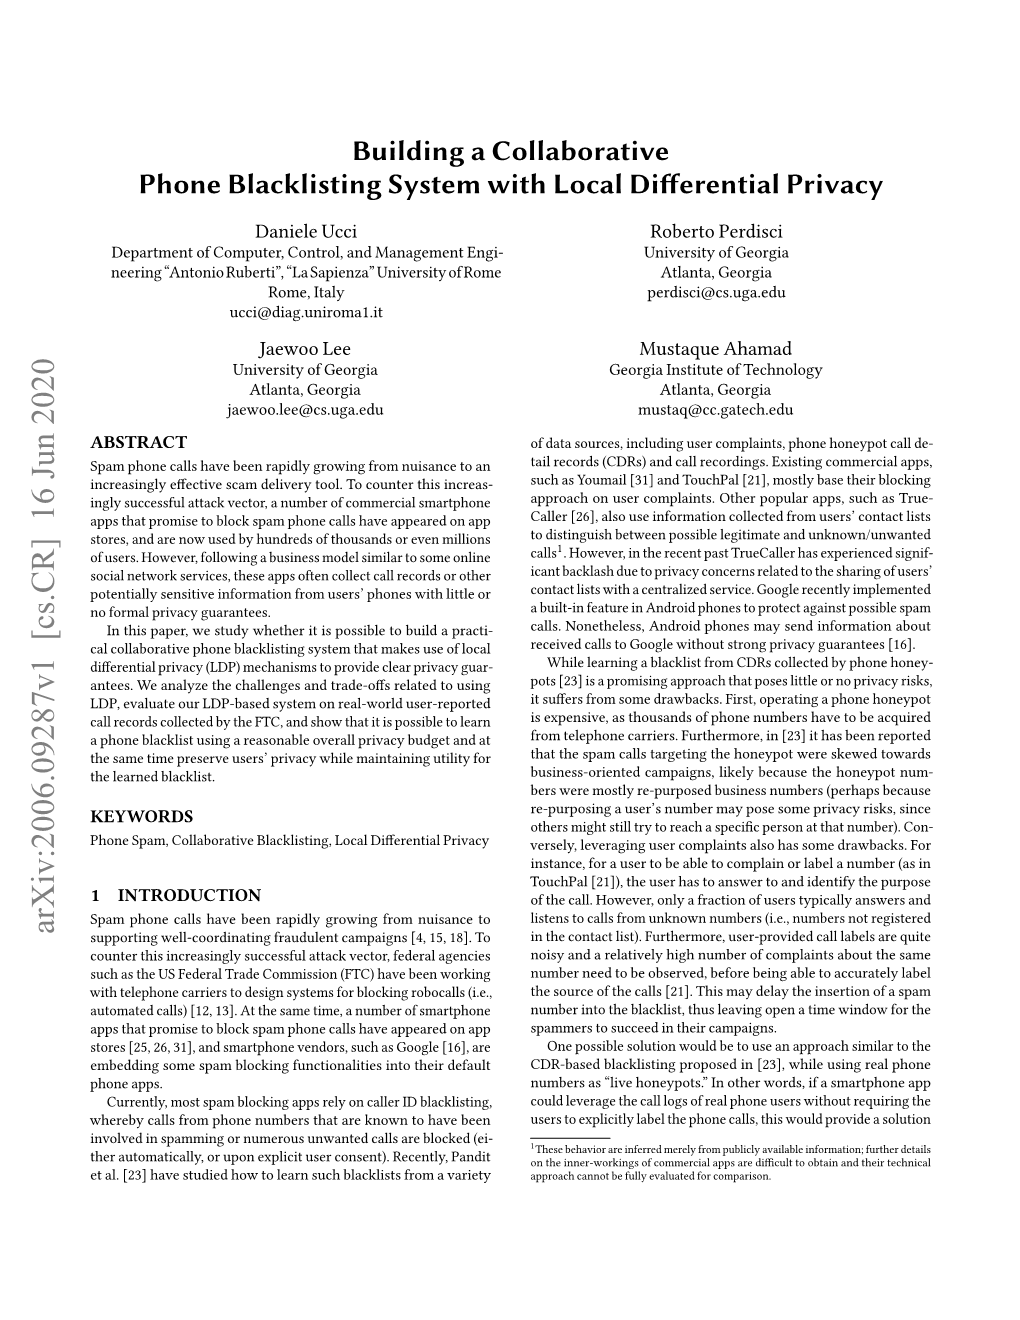 Building a Collaborative Phone Blacklisting System with Local Differential Privacy